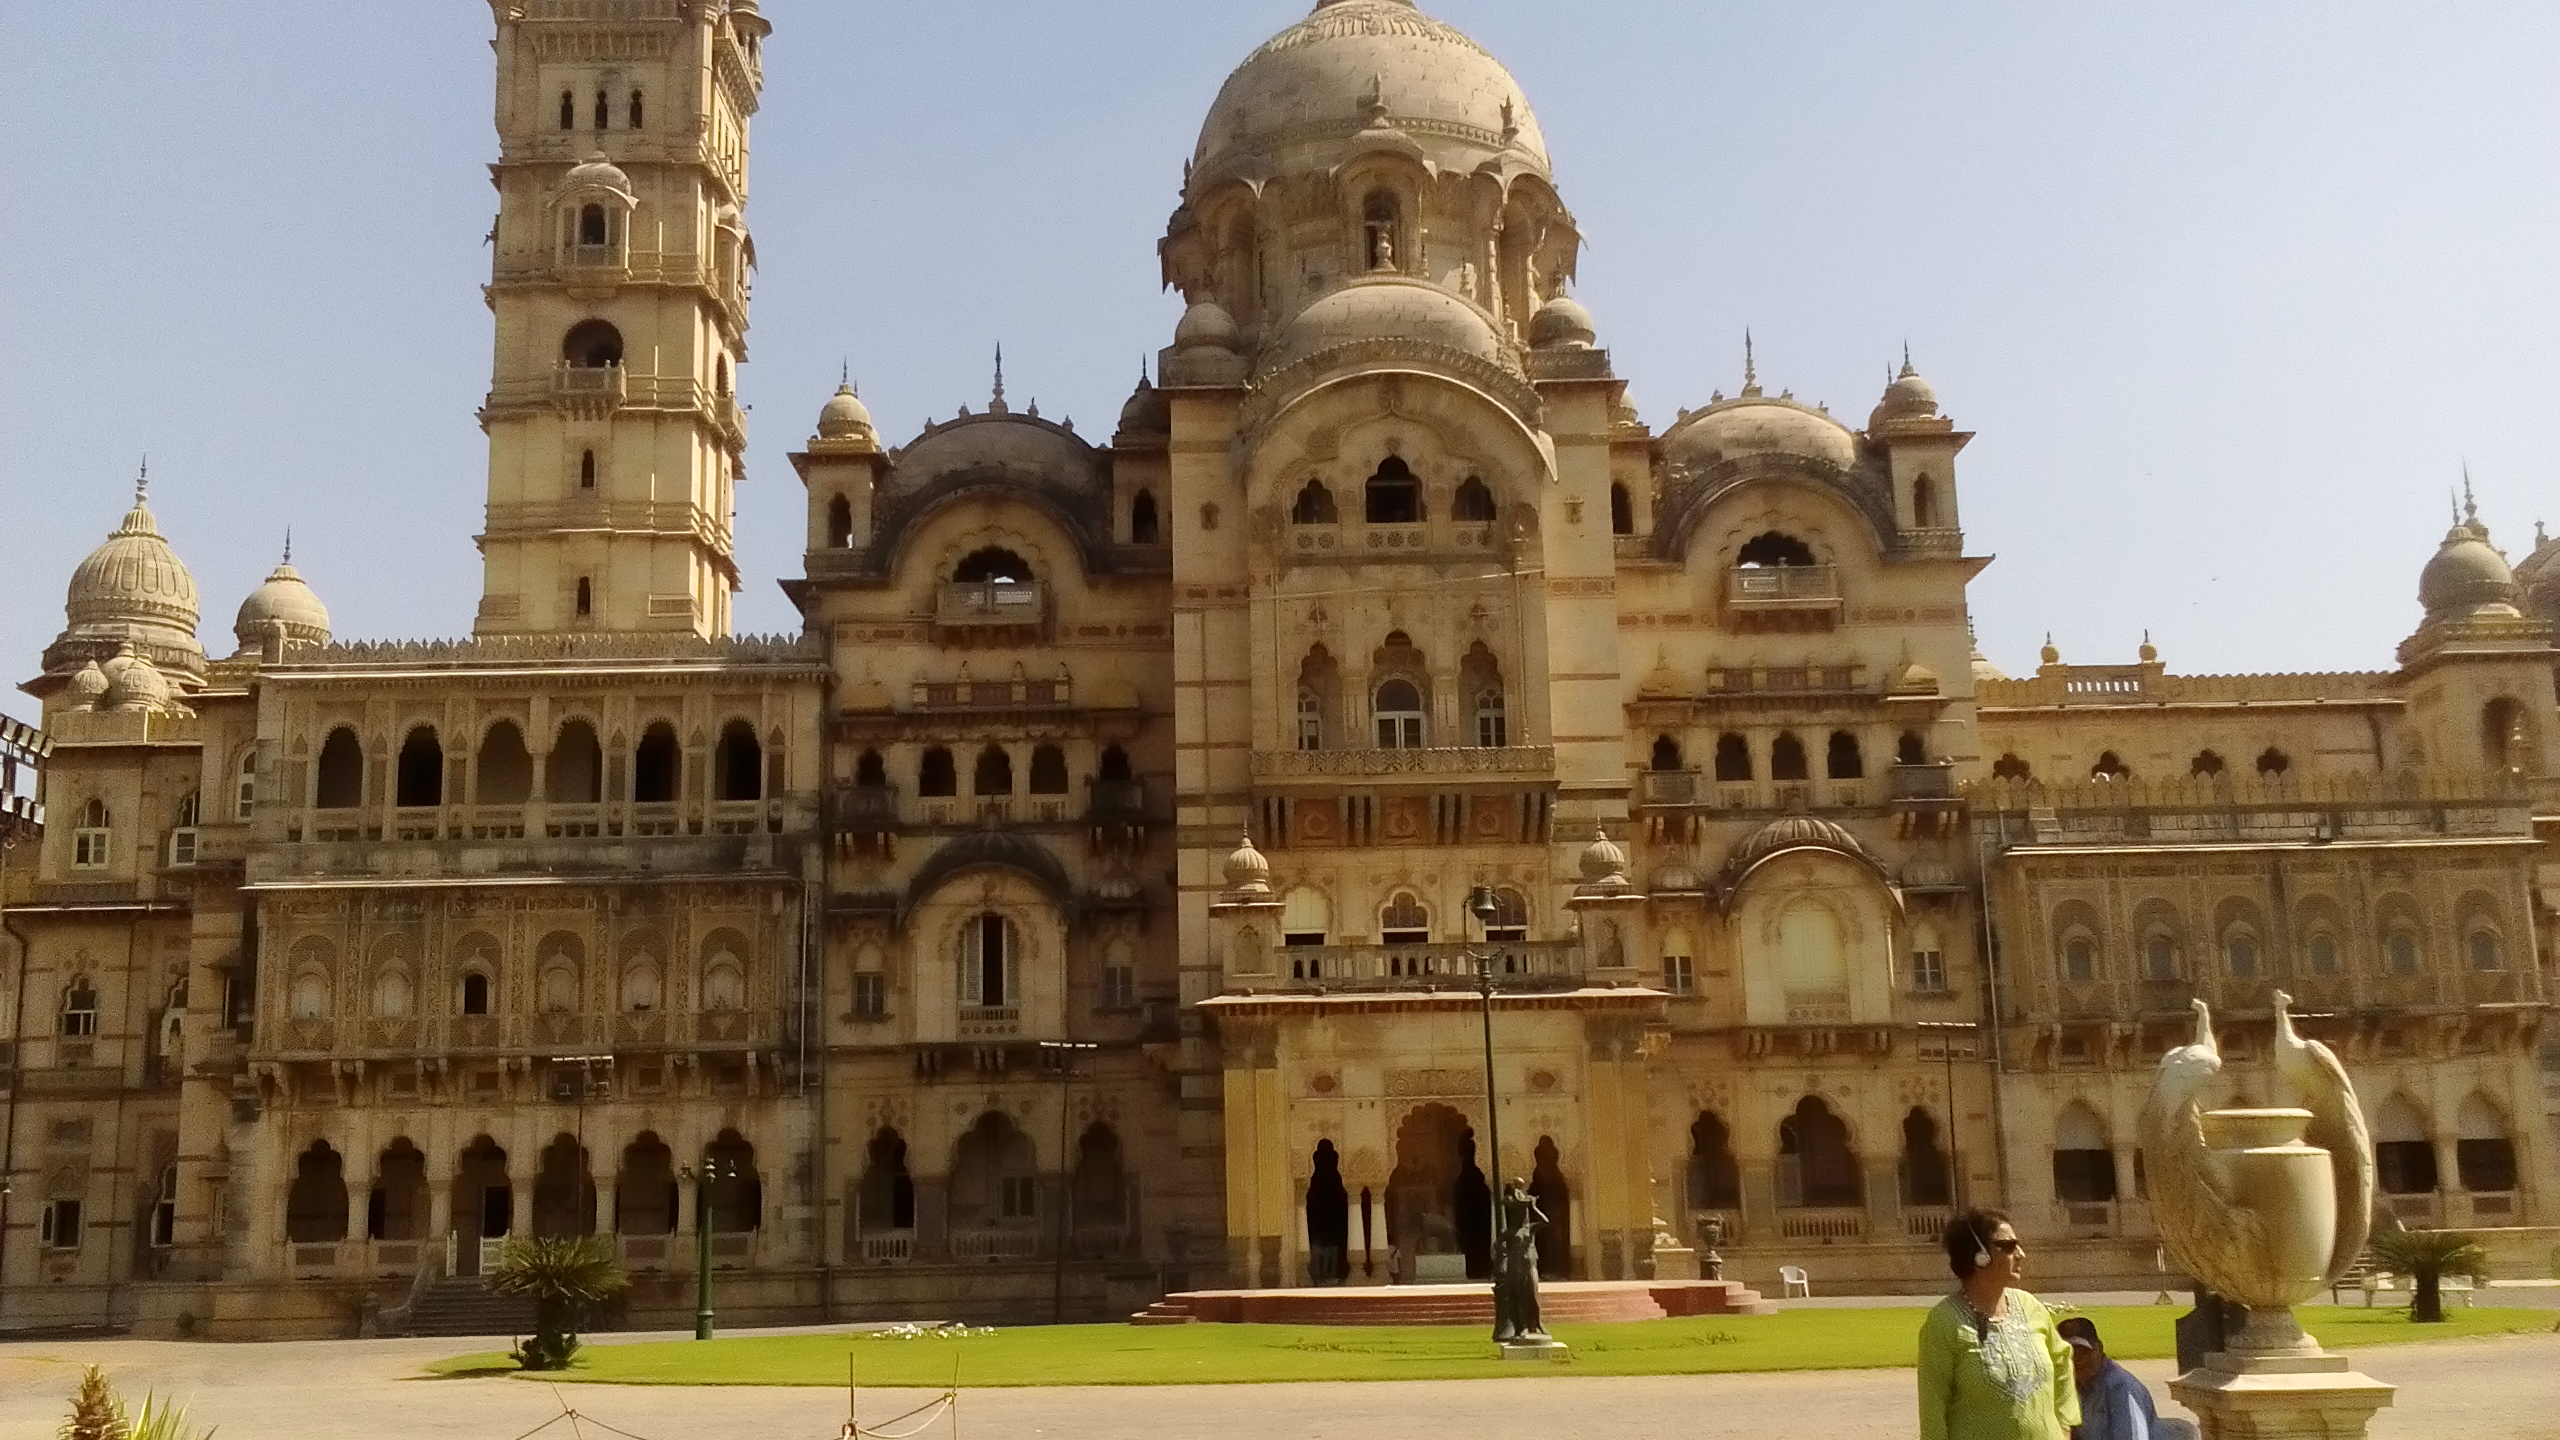 Four times the size of Buckingham Palace, the Laxmi Vilas Palace in Vadodar...